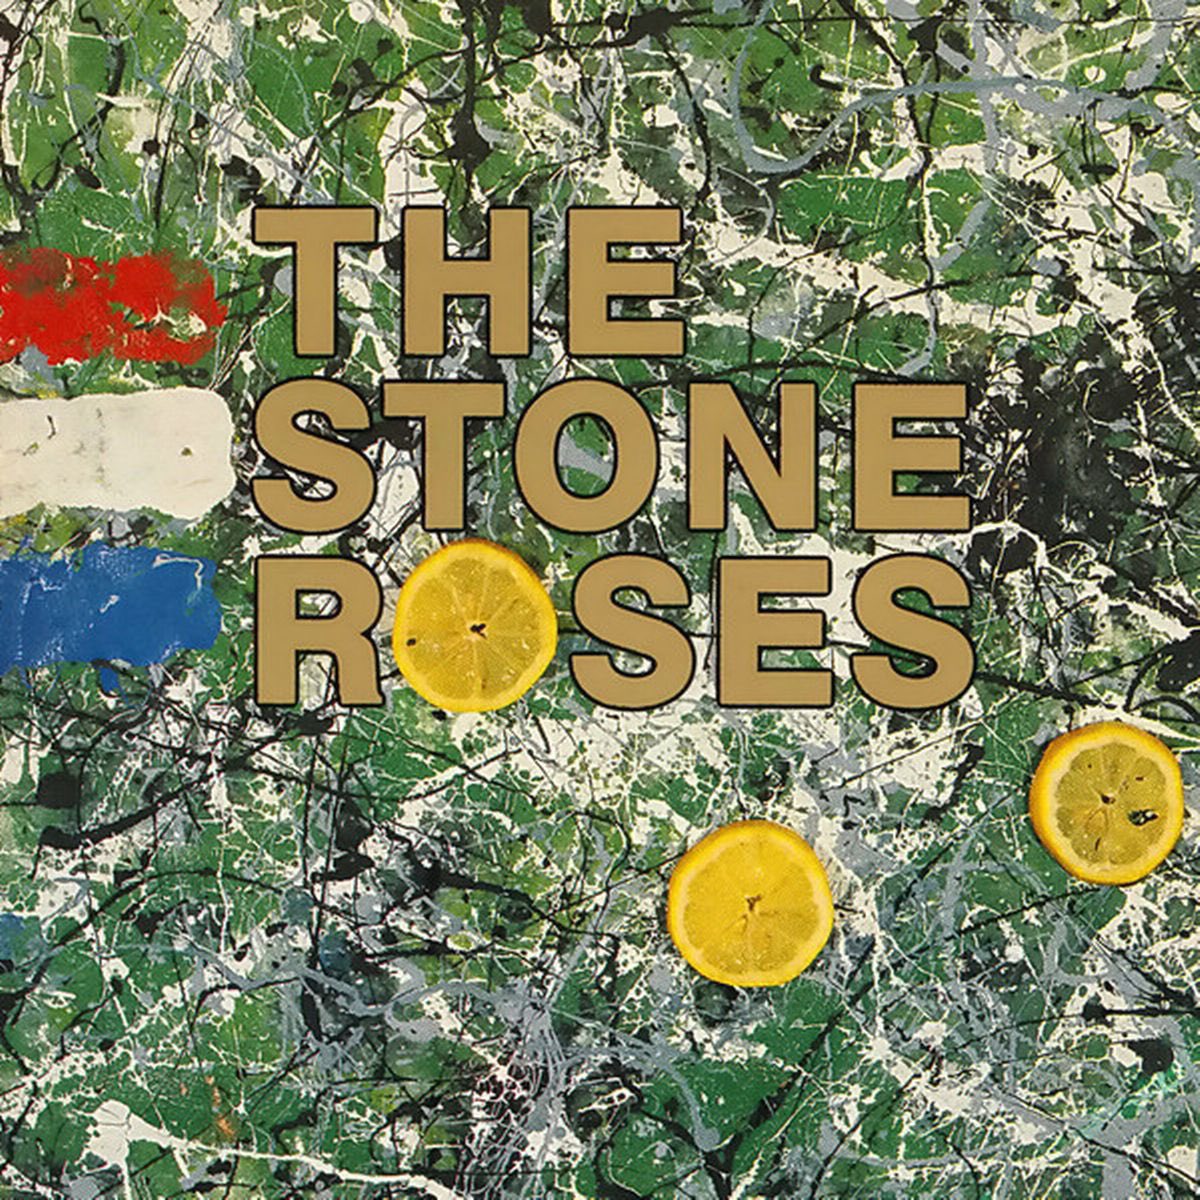 35 years ago today, The Stone Roses released their iconic self titled debut album